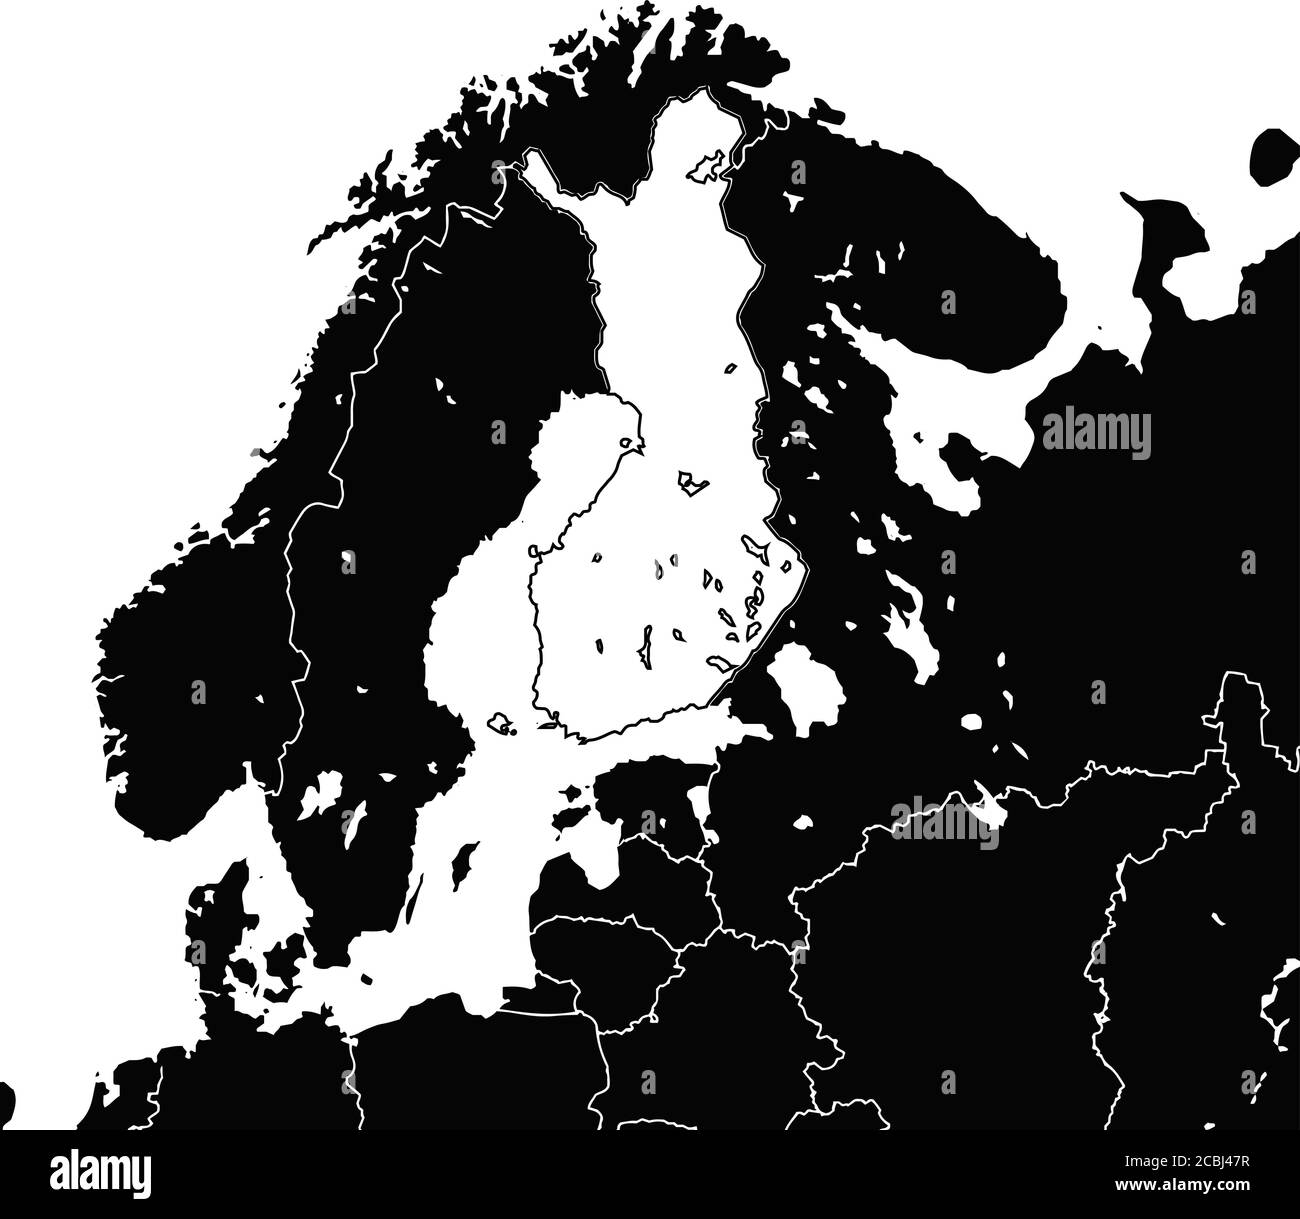 Finland map. Black and white illustration. Icon sign for print and labelling. Stock Vector